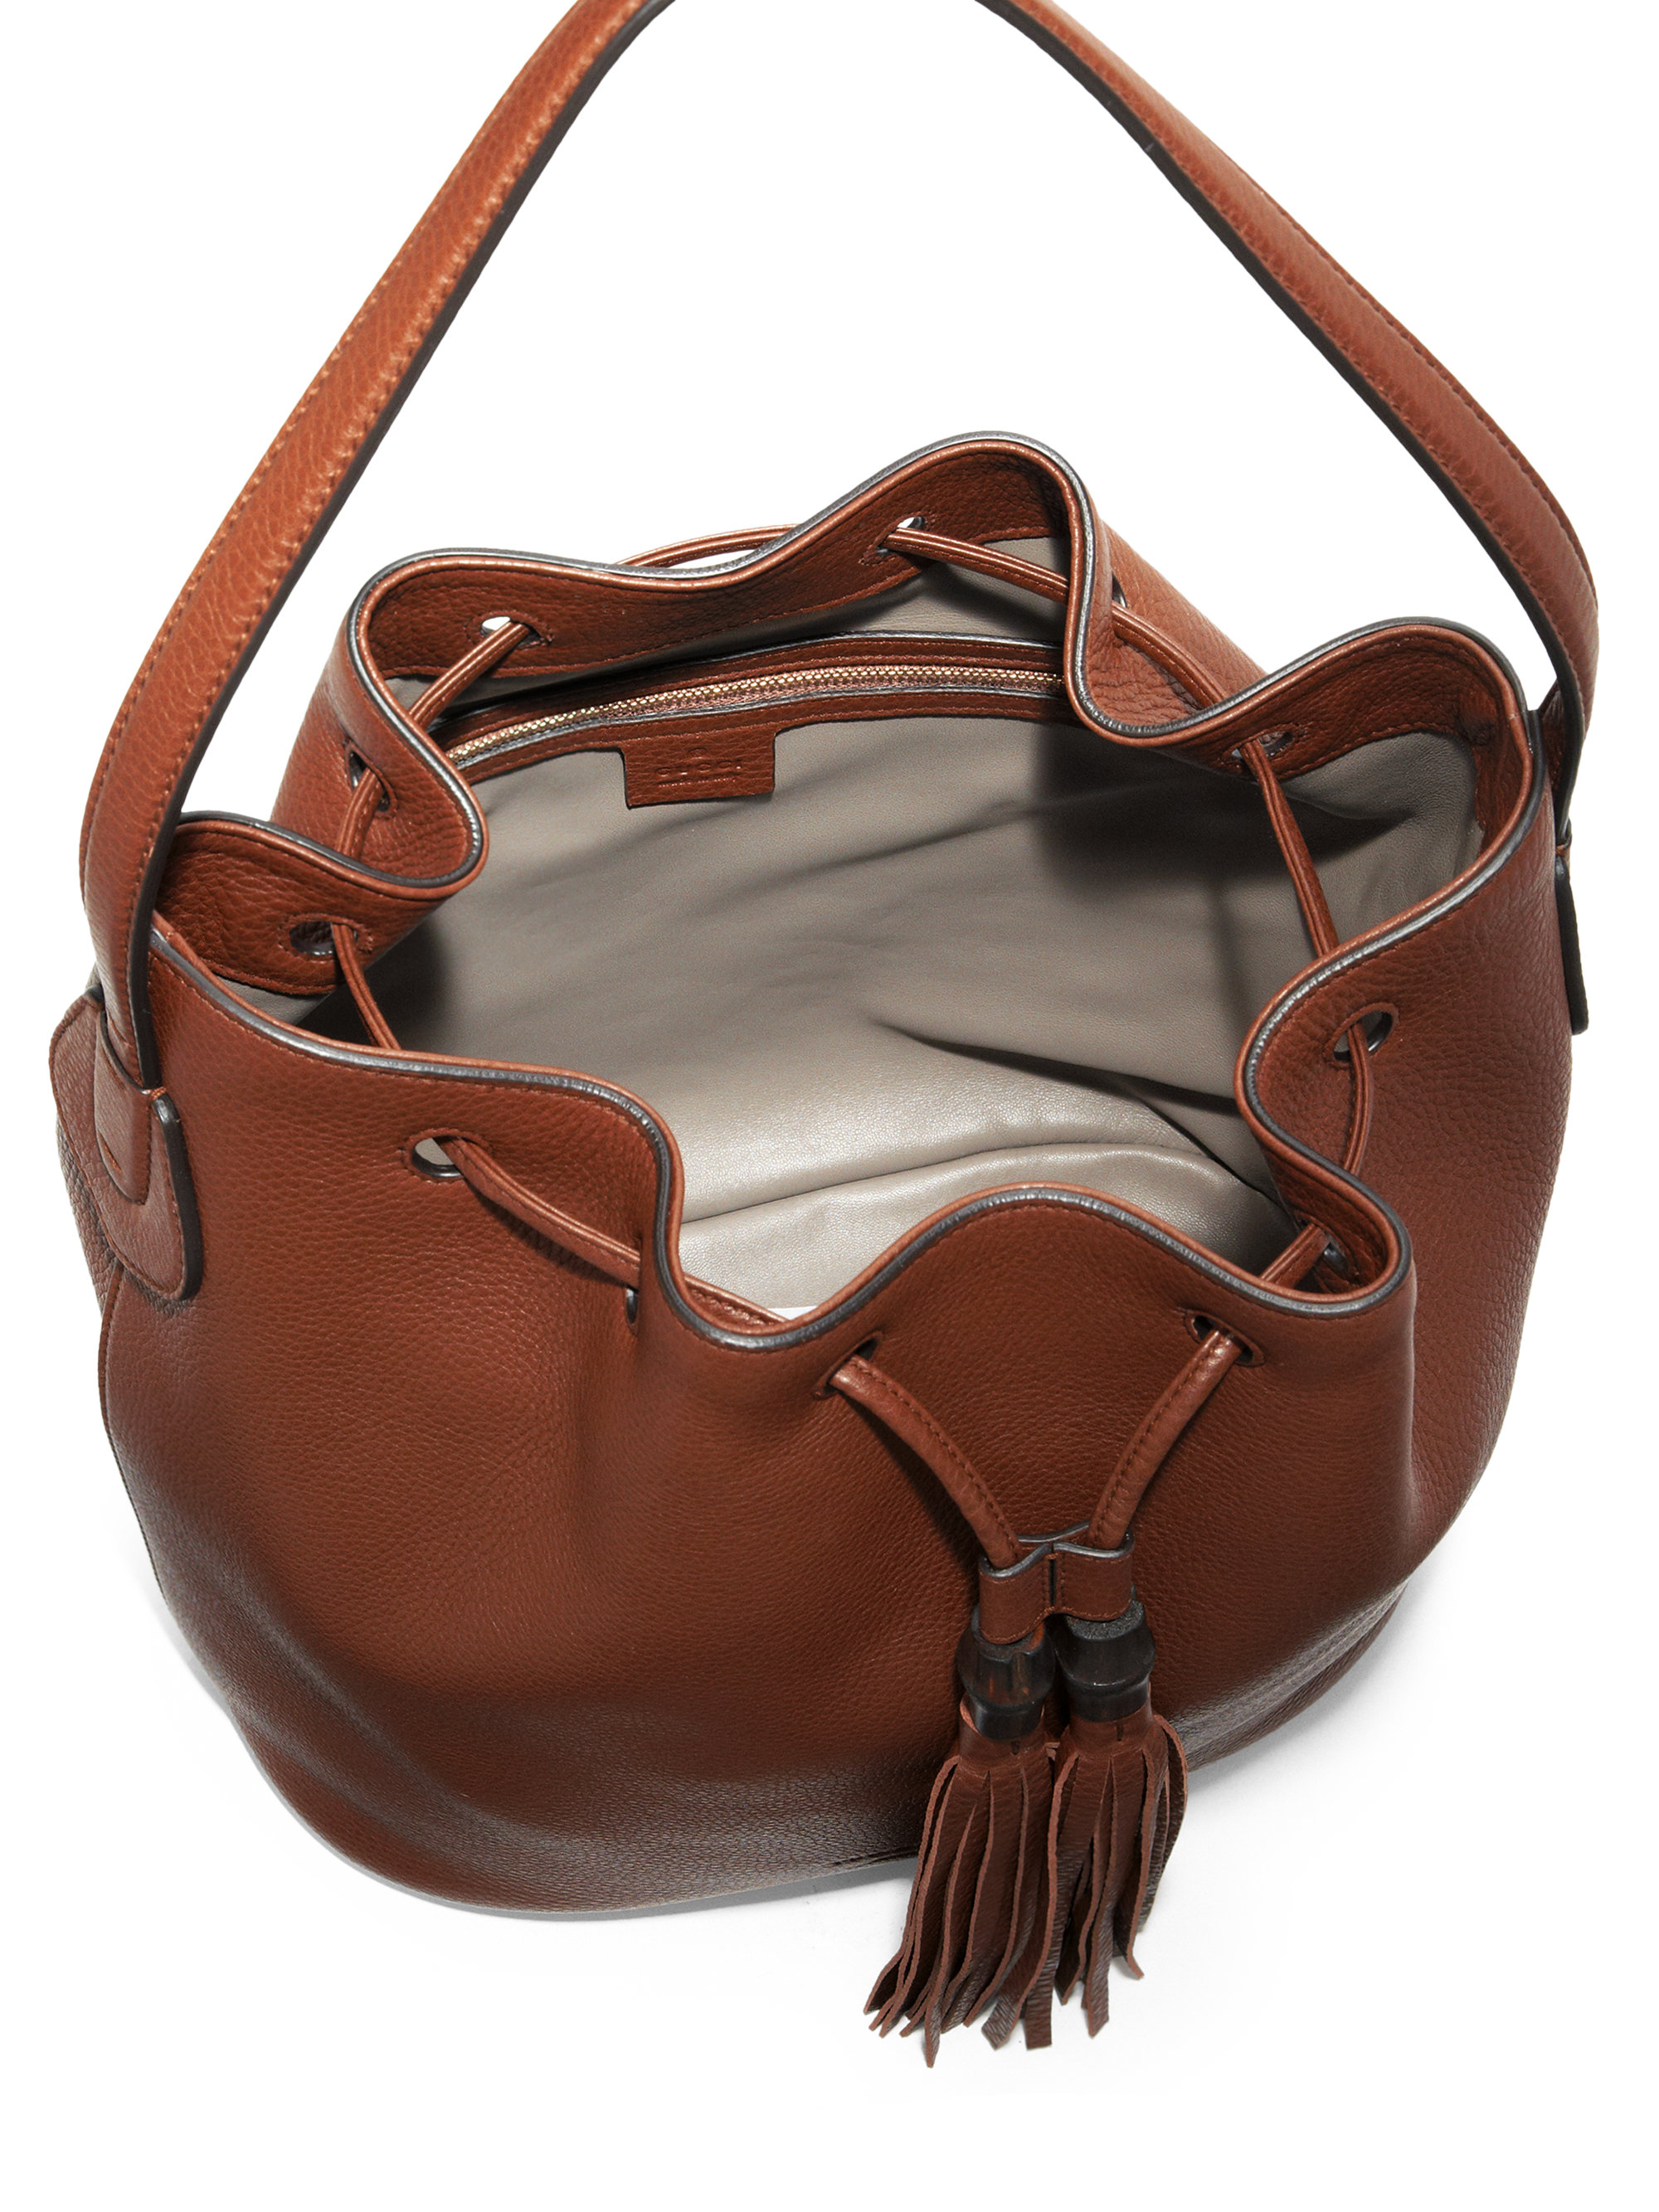 Gucci Lady Tassel Leather Bucket Bag in Brown (ALMOND) | Lyst